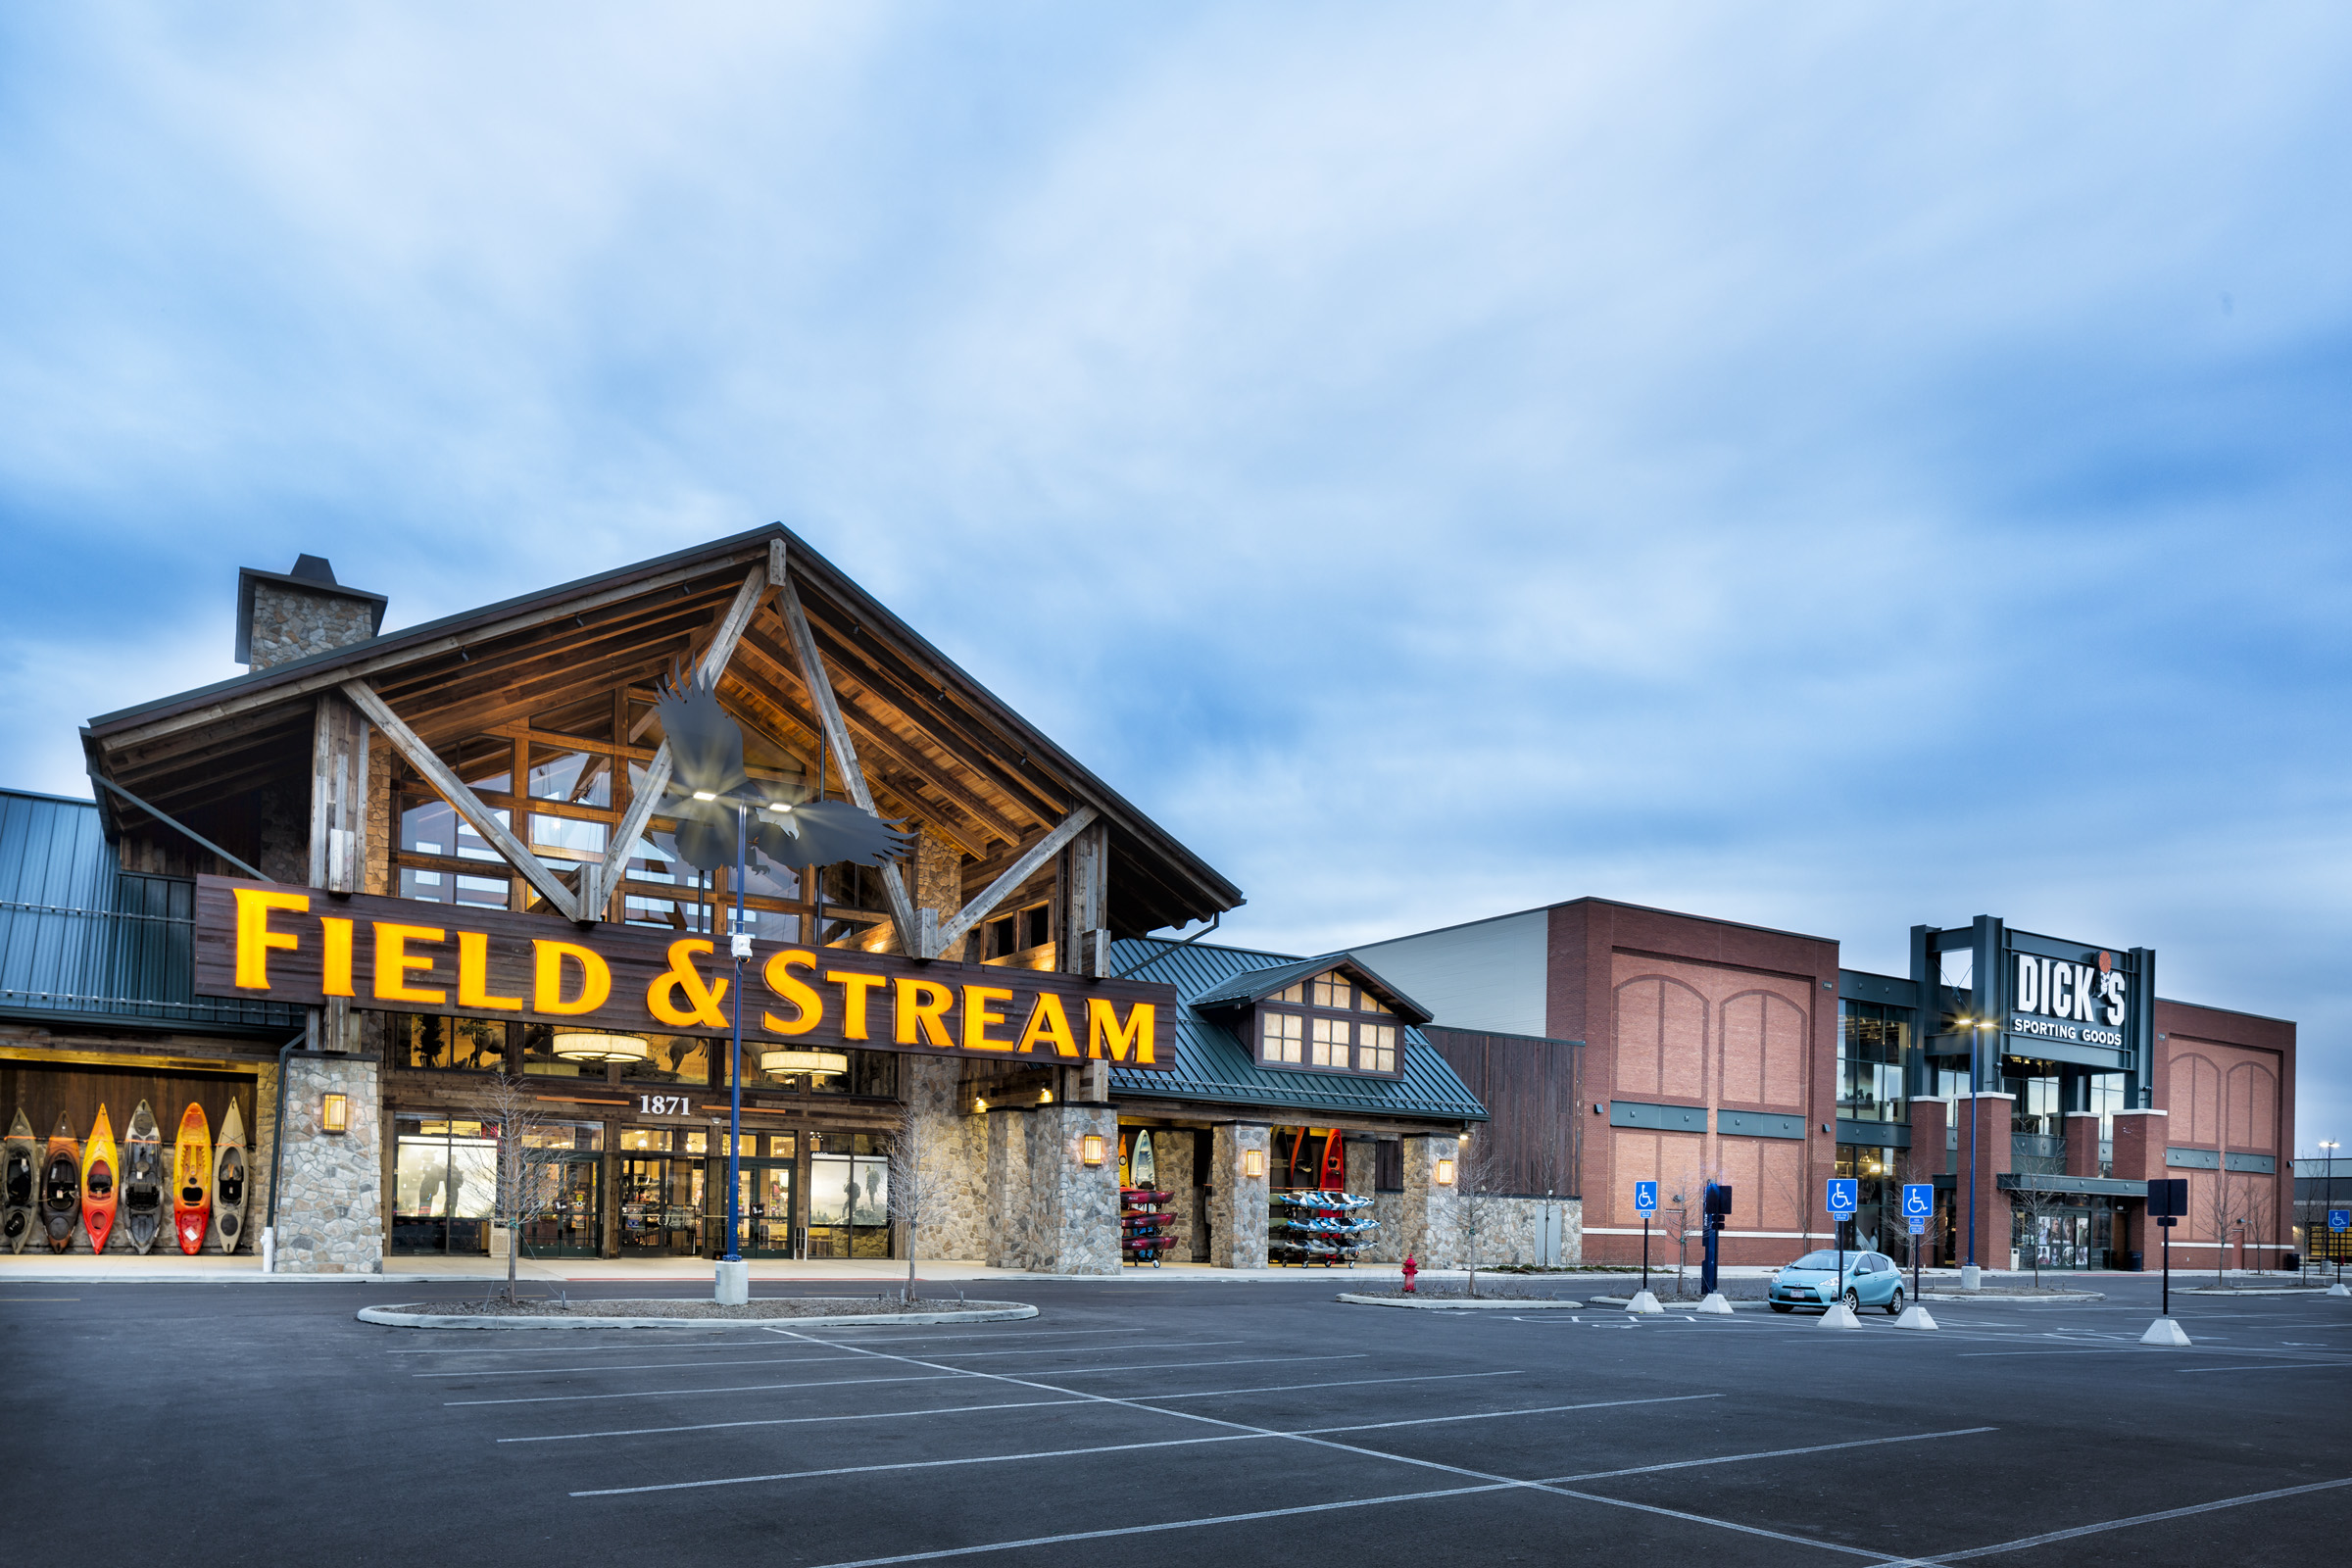 Dick’s Sporting Goods and Field and Stream